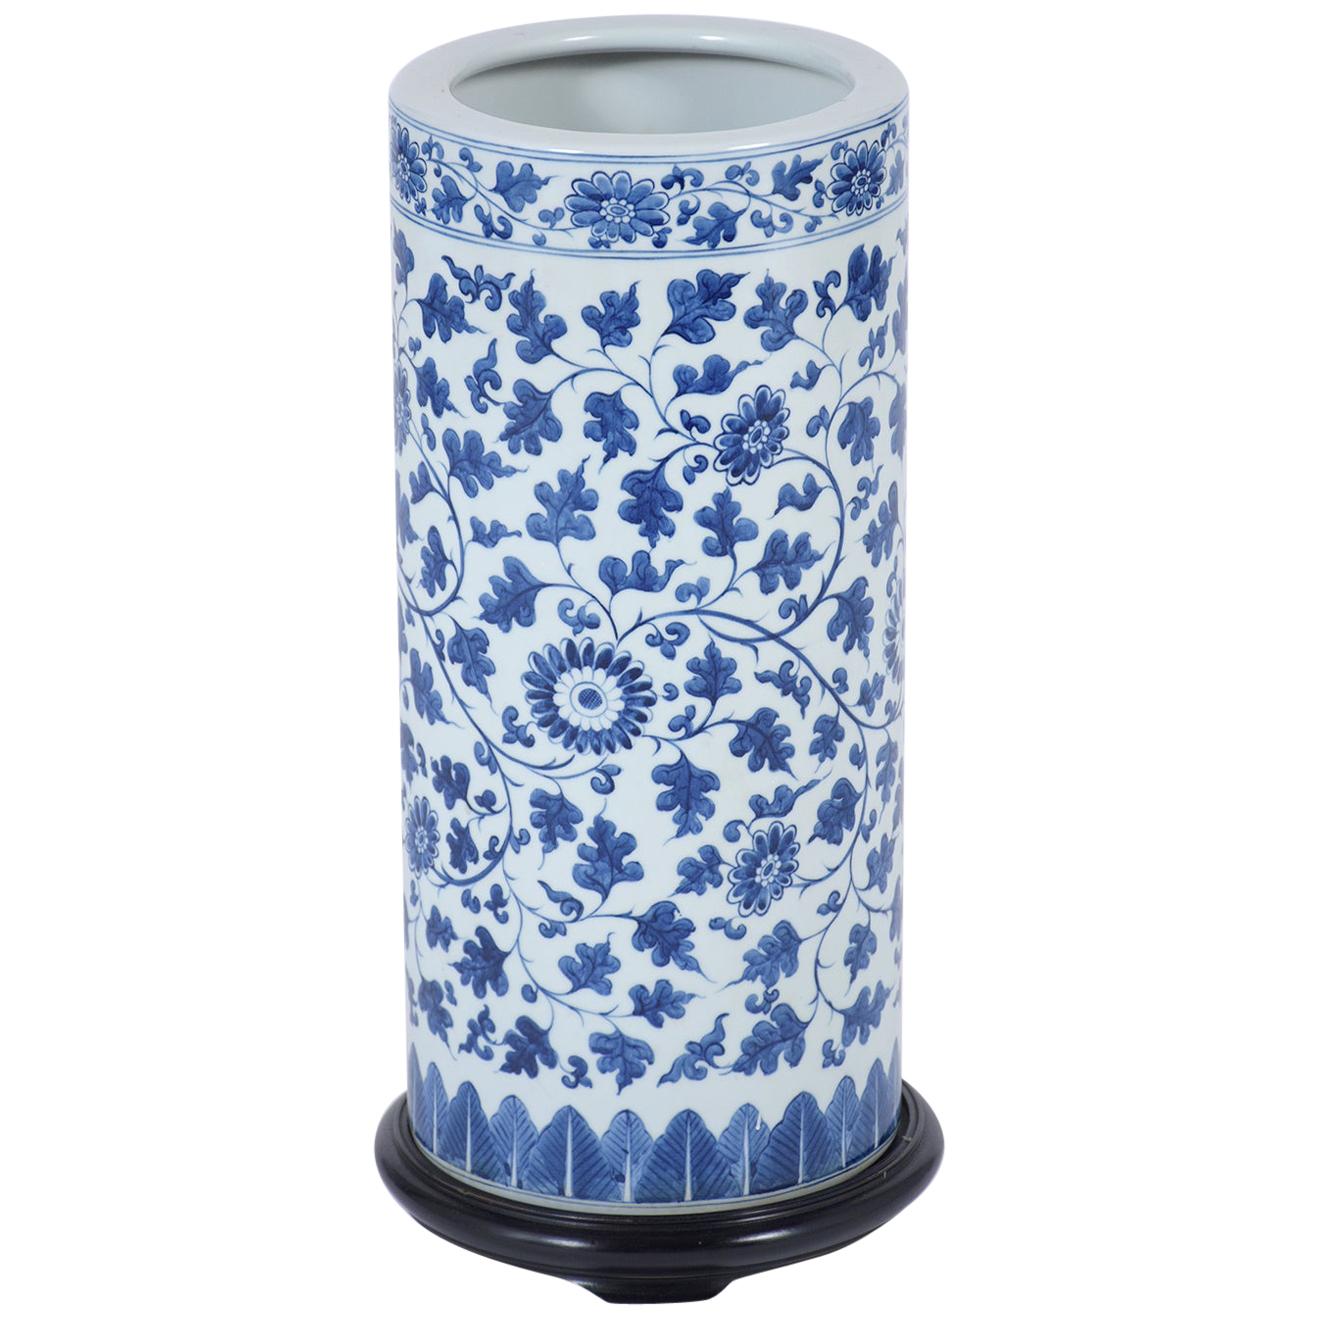 Chinese Blue Porcelain Umbrella Stand